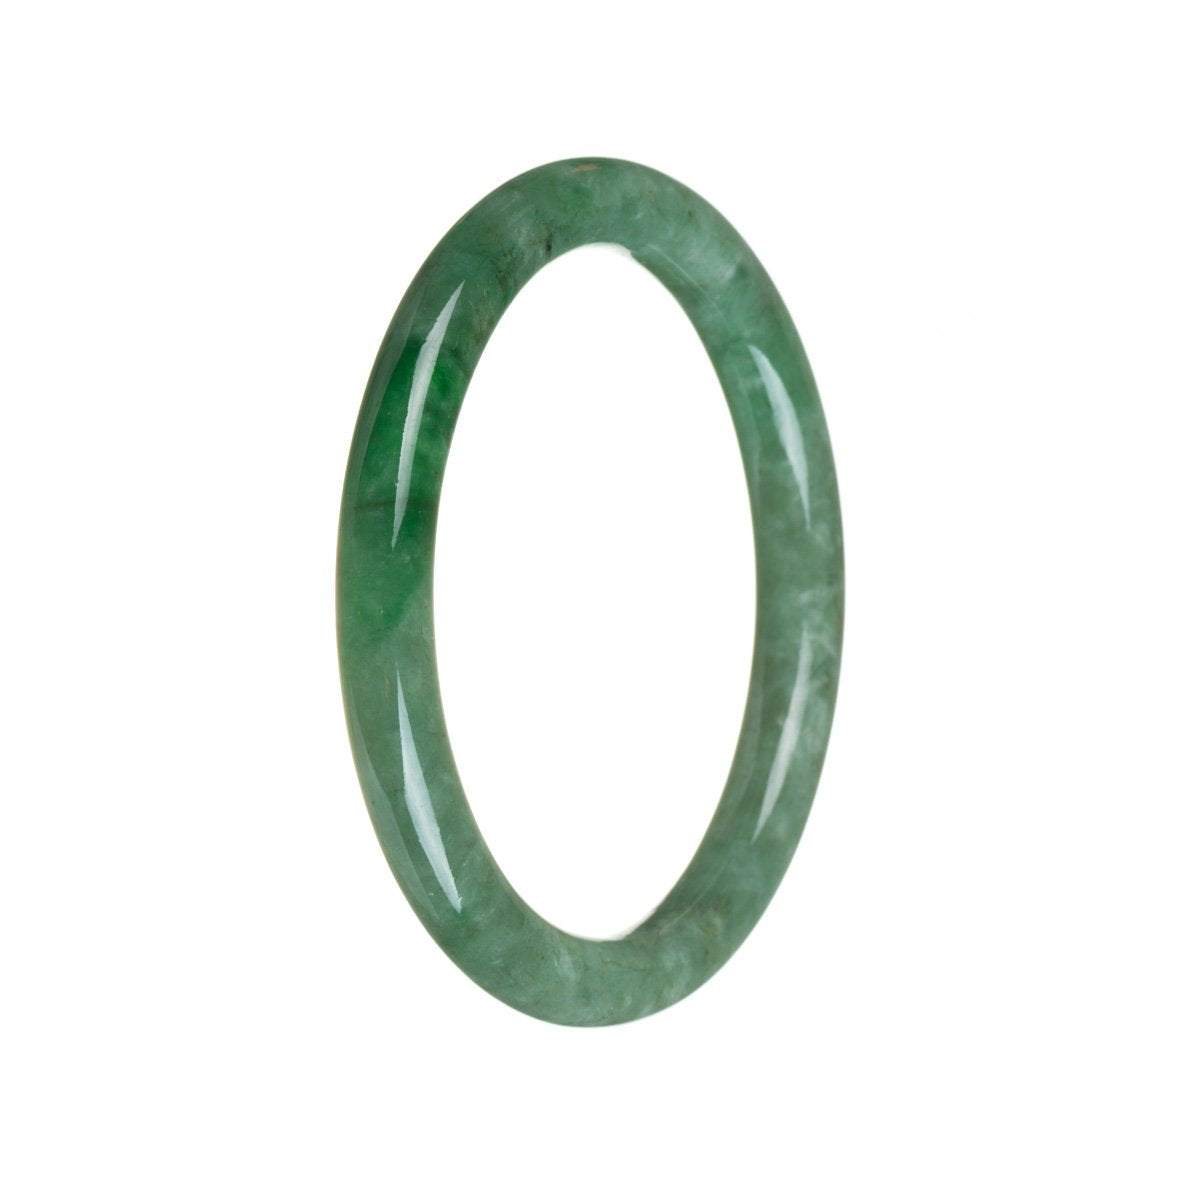 A close-up image of a petite round jade bracelet in a vibrant green color with an imperial green hue. This genuine Type A green jade bracelet measures 57mm in size and is offered by MAYS GEMS.